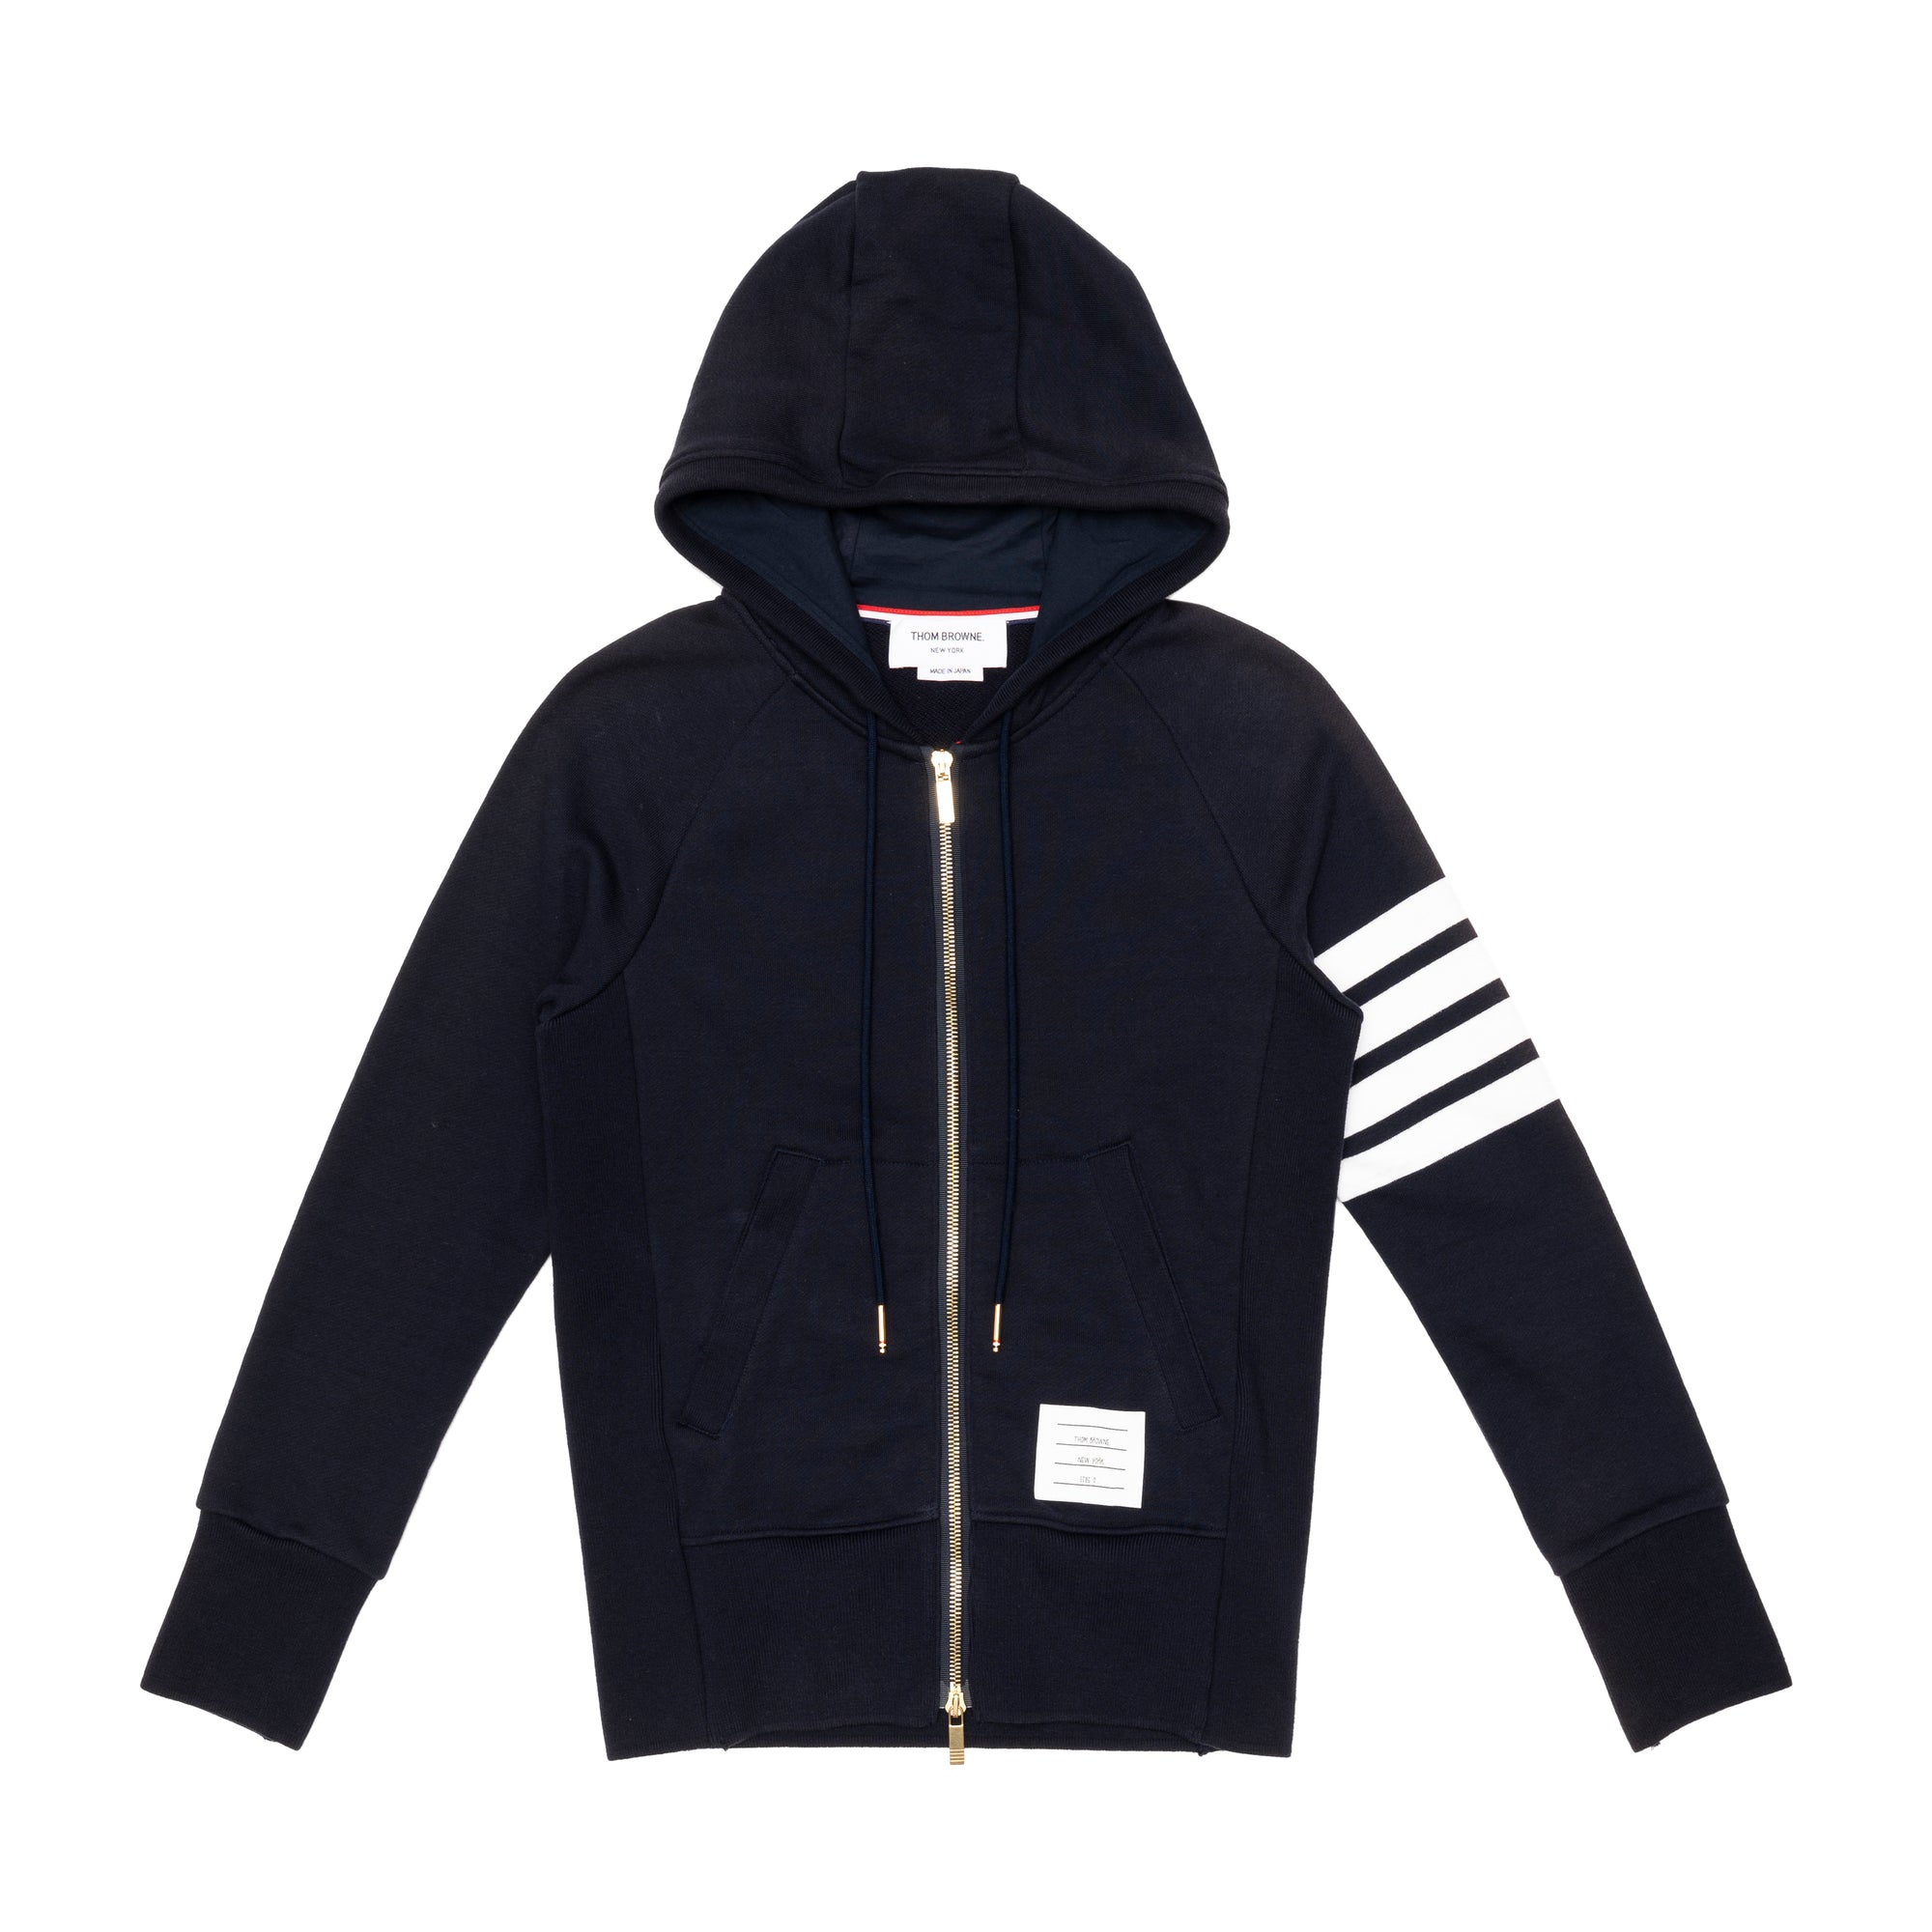 THOM BROWNE - MENS CLASSIC FULL ZIP HOODIE WITH E - NAVY - (MJT022H-00535) view 1